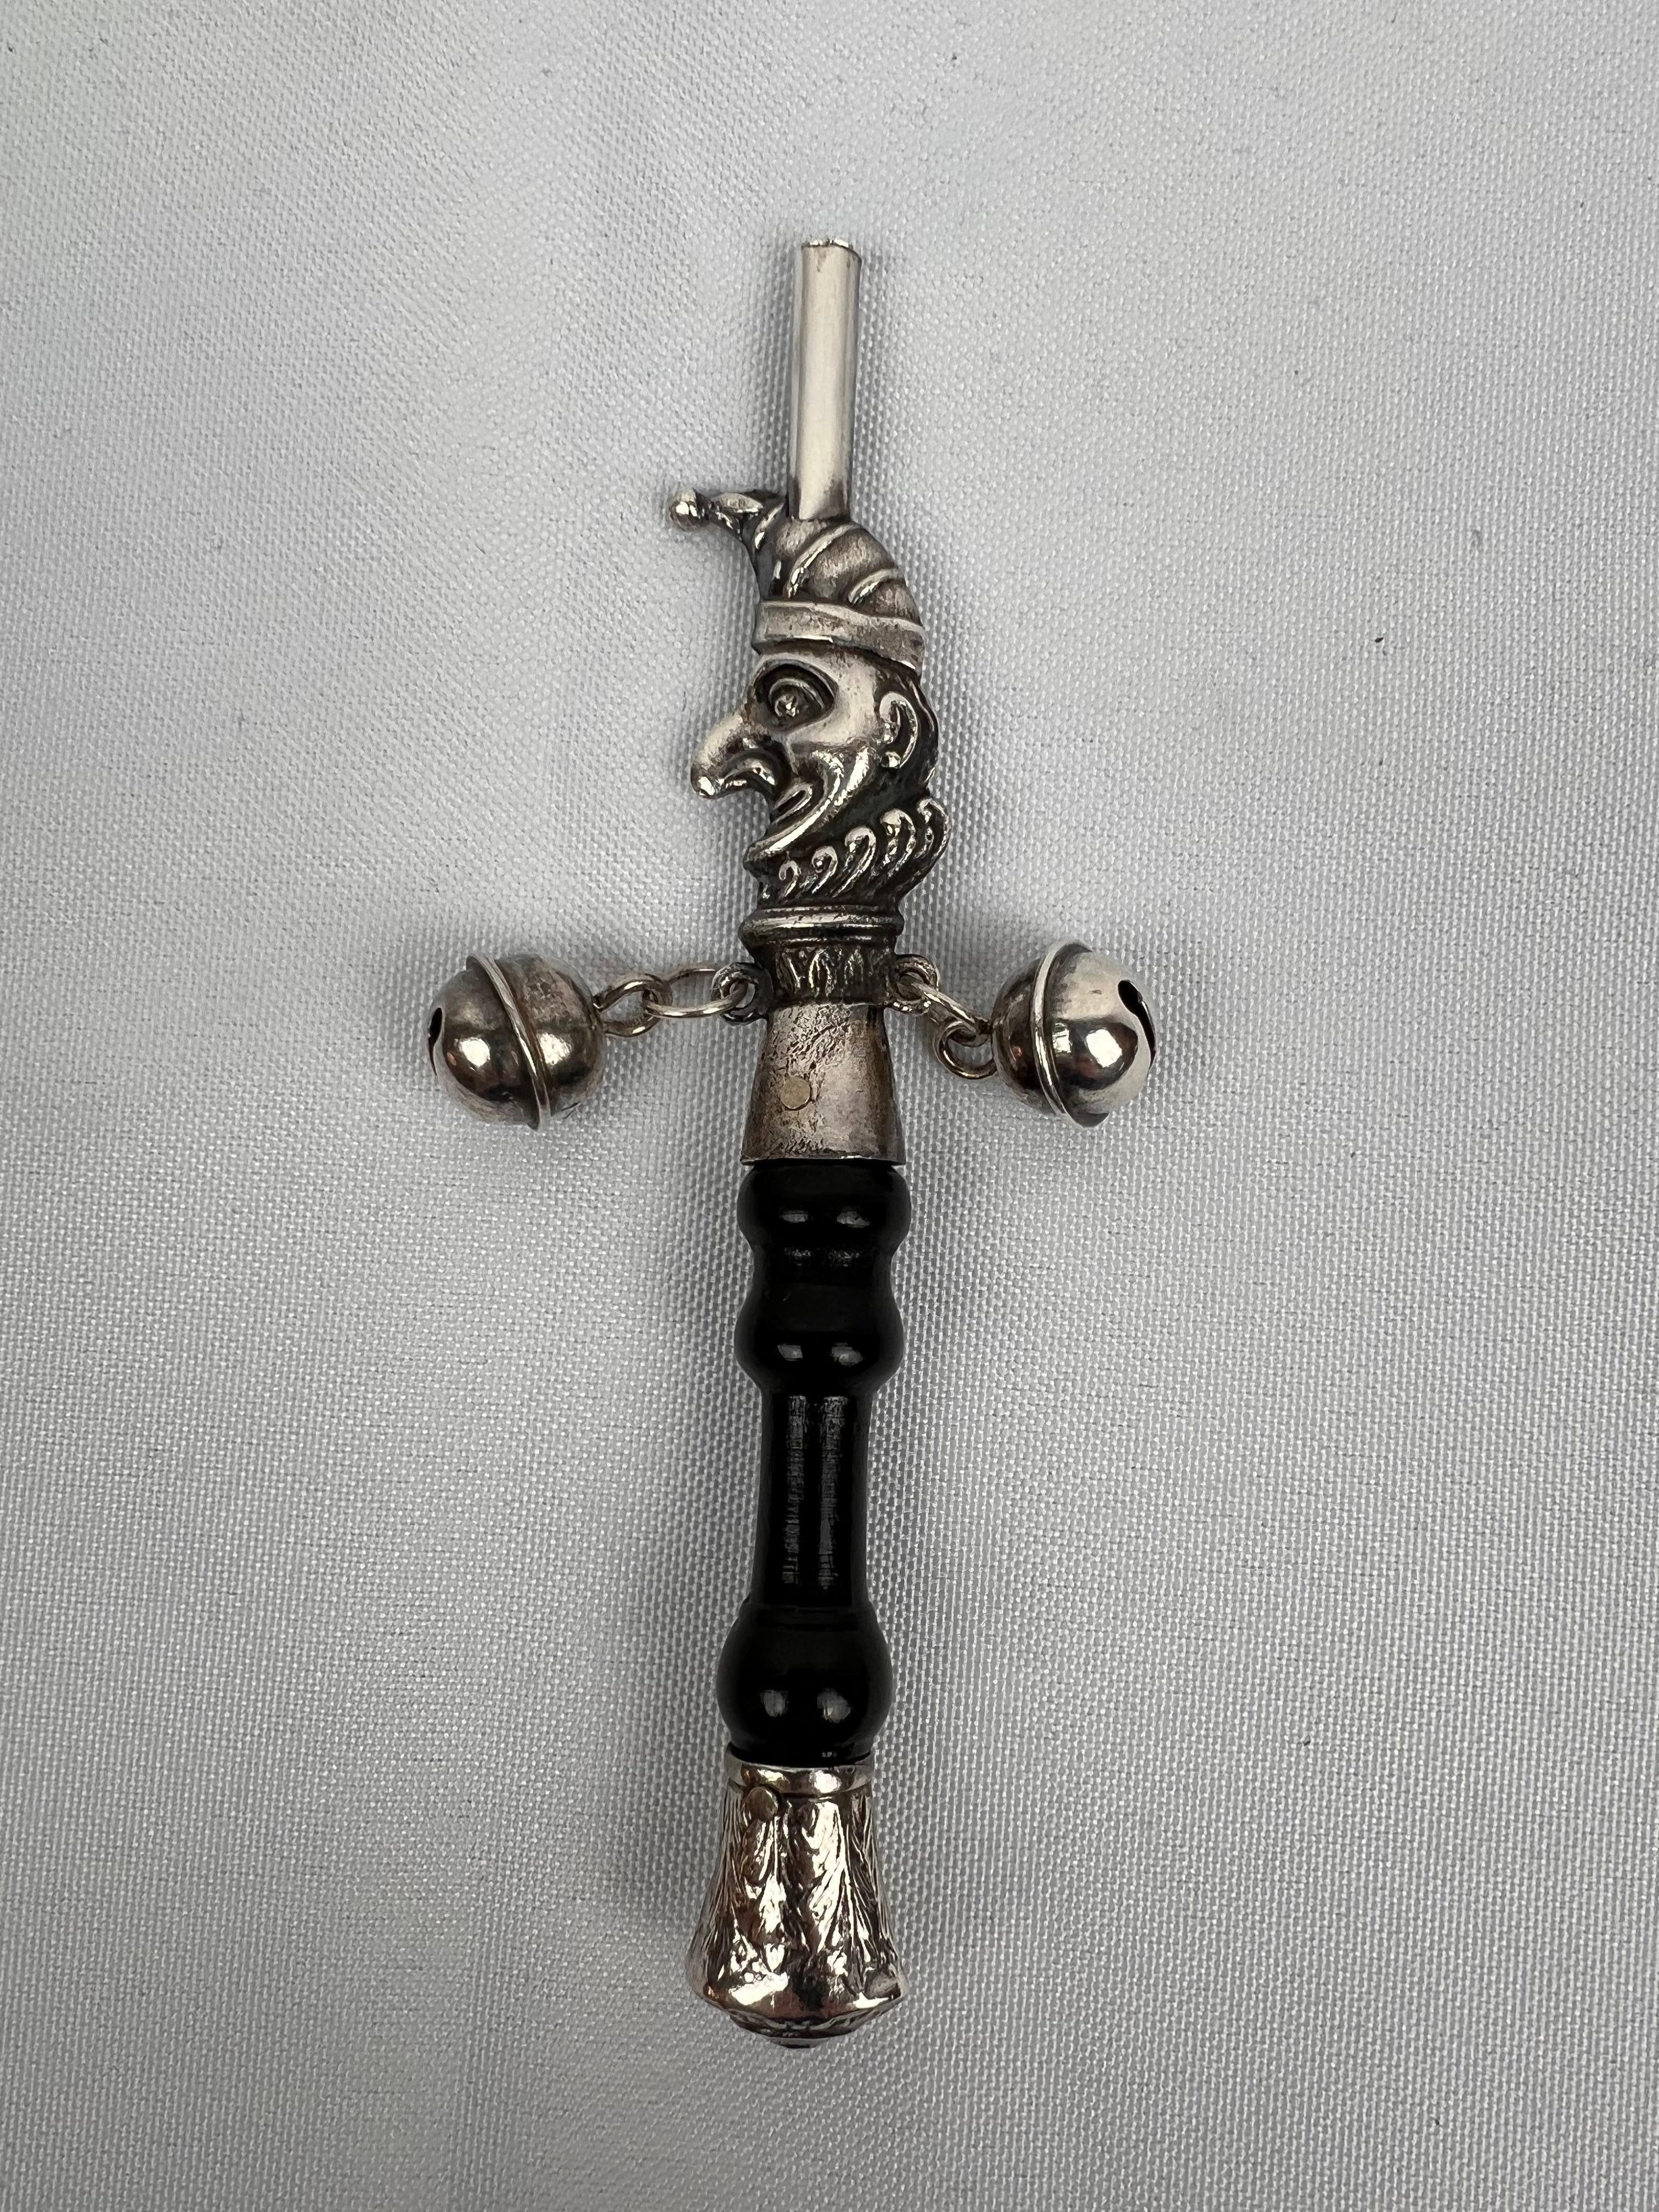 Victorian solid silver baby's rattle in the form of a 